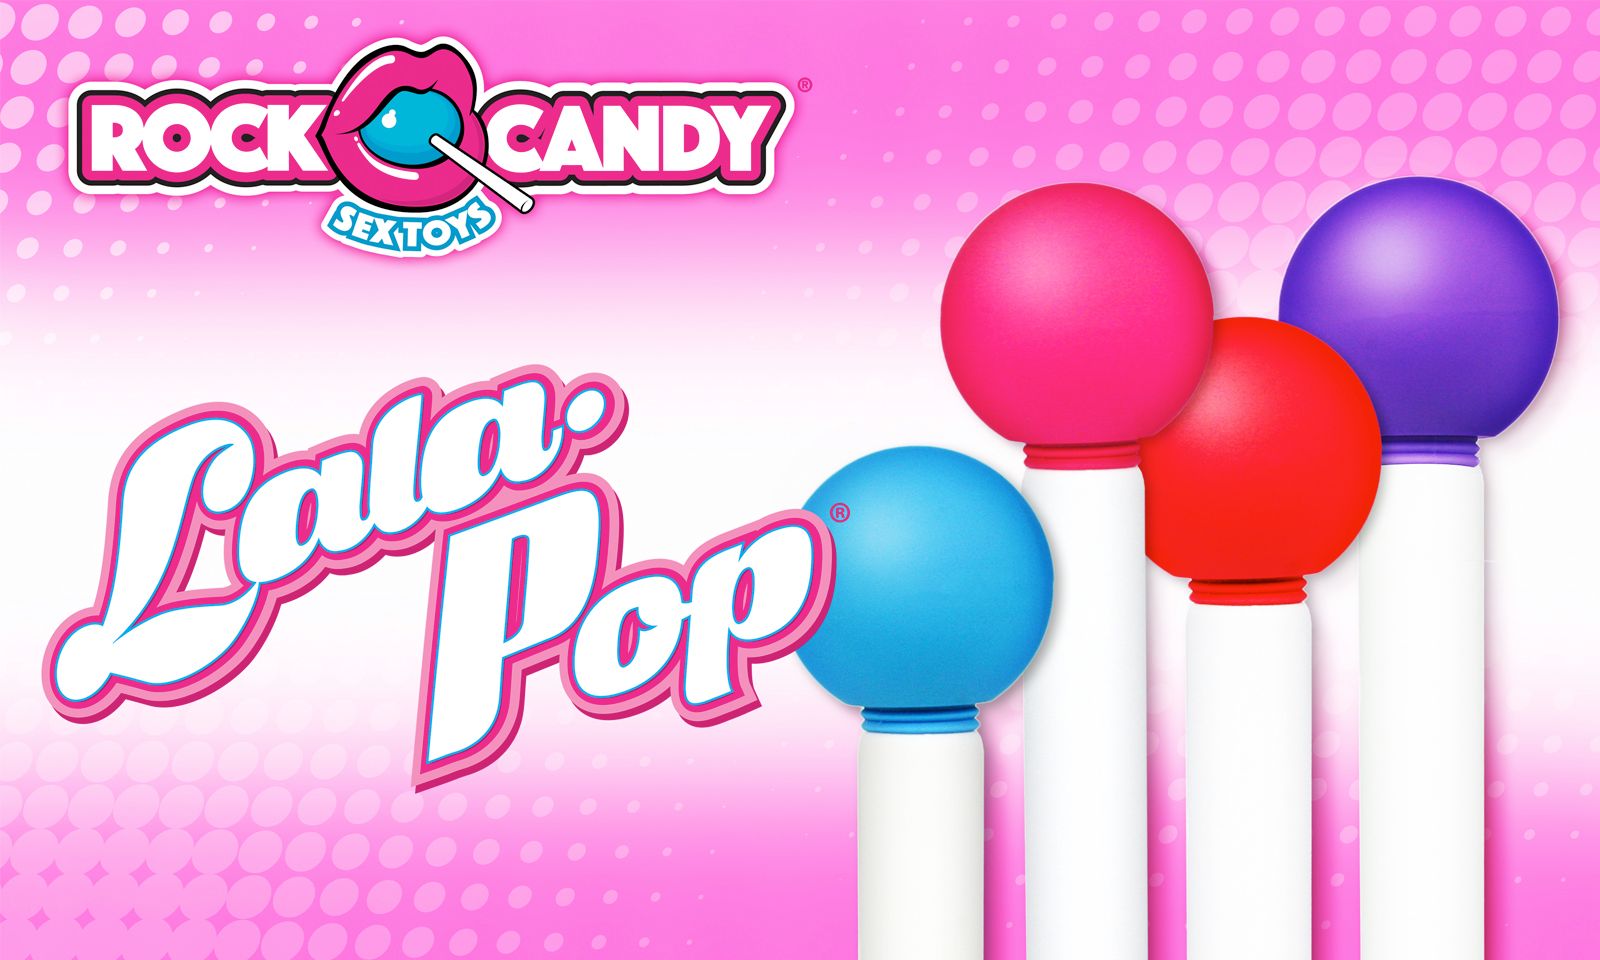 Get Pleasure Poppin’ With Rock Candy’s Lala Pop